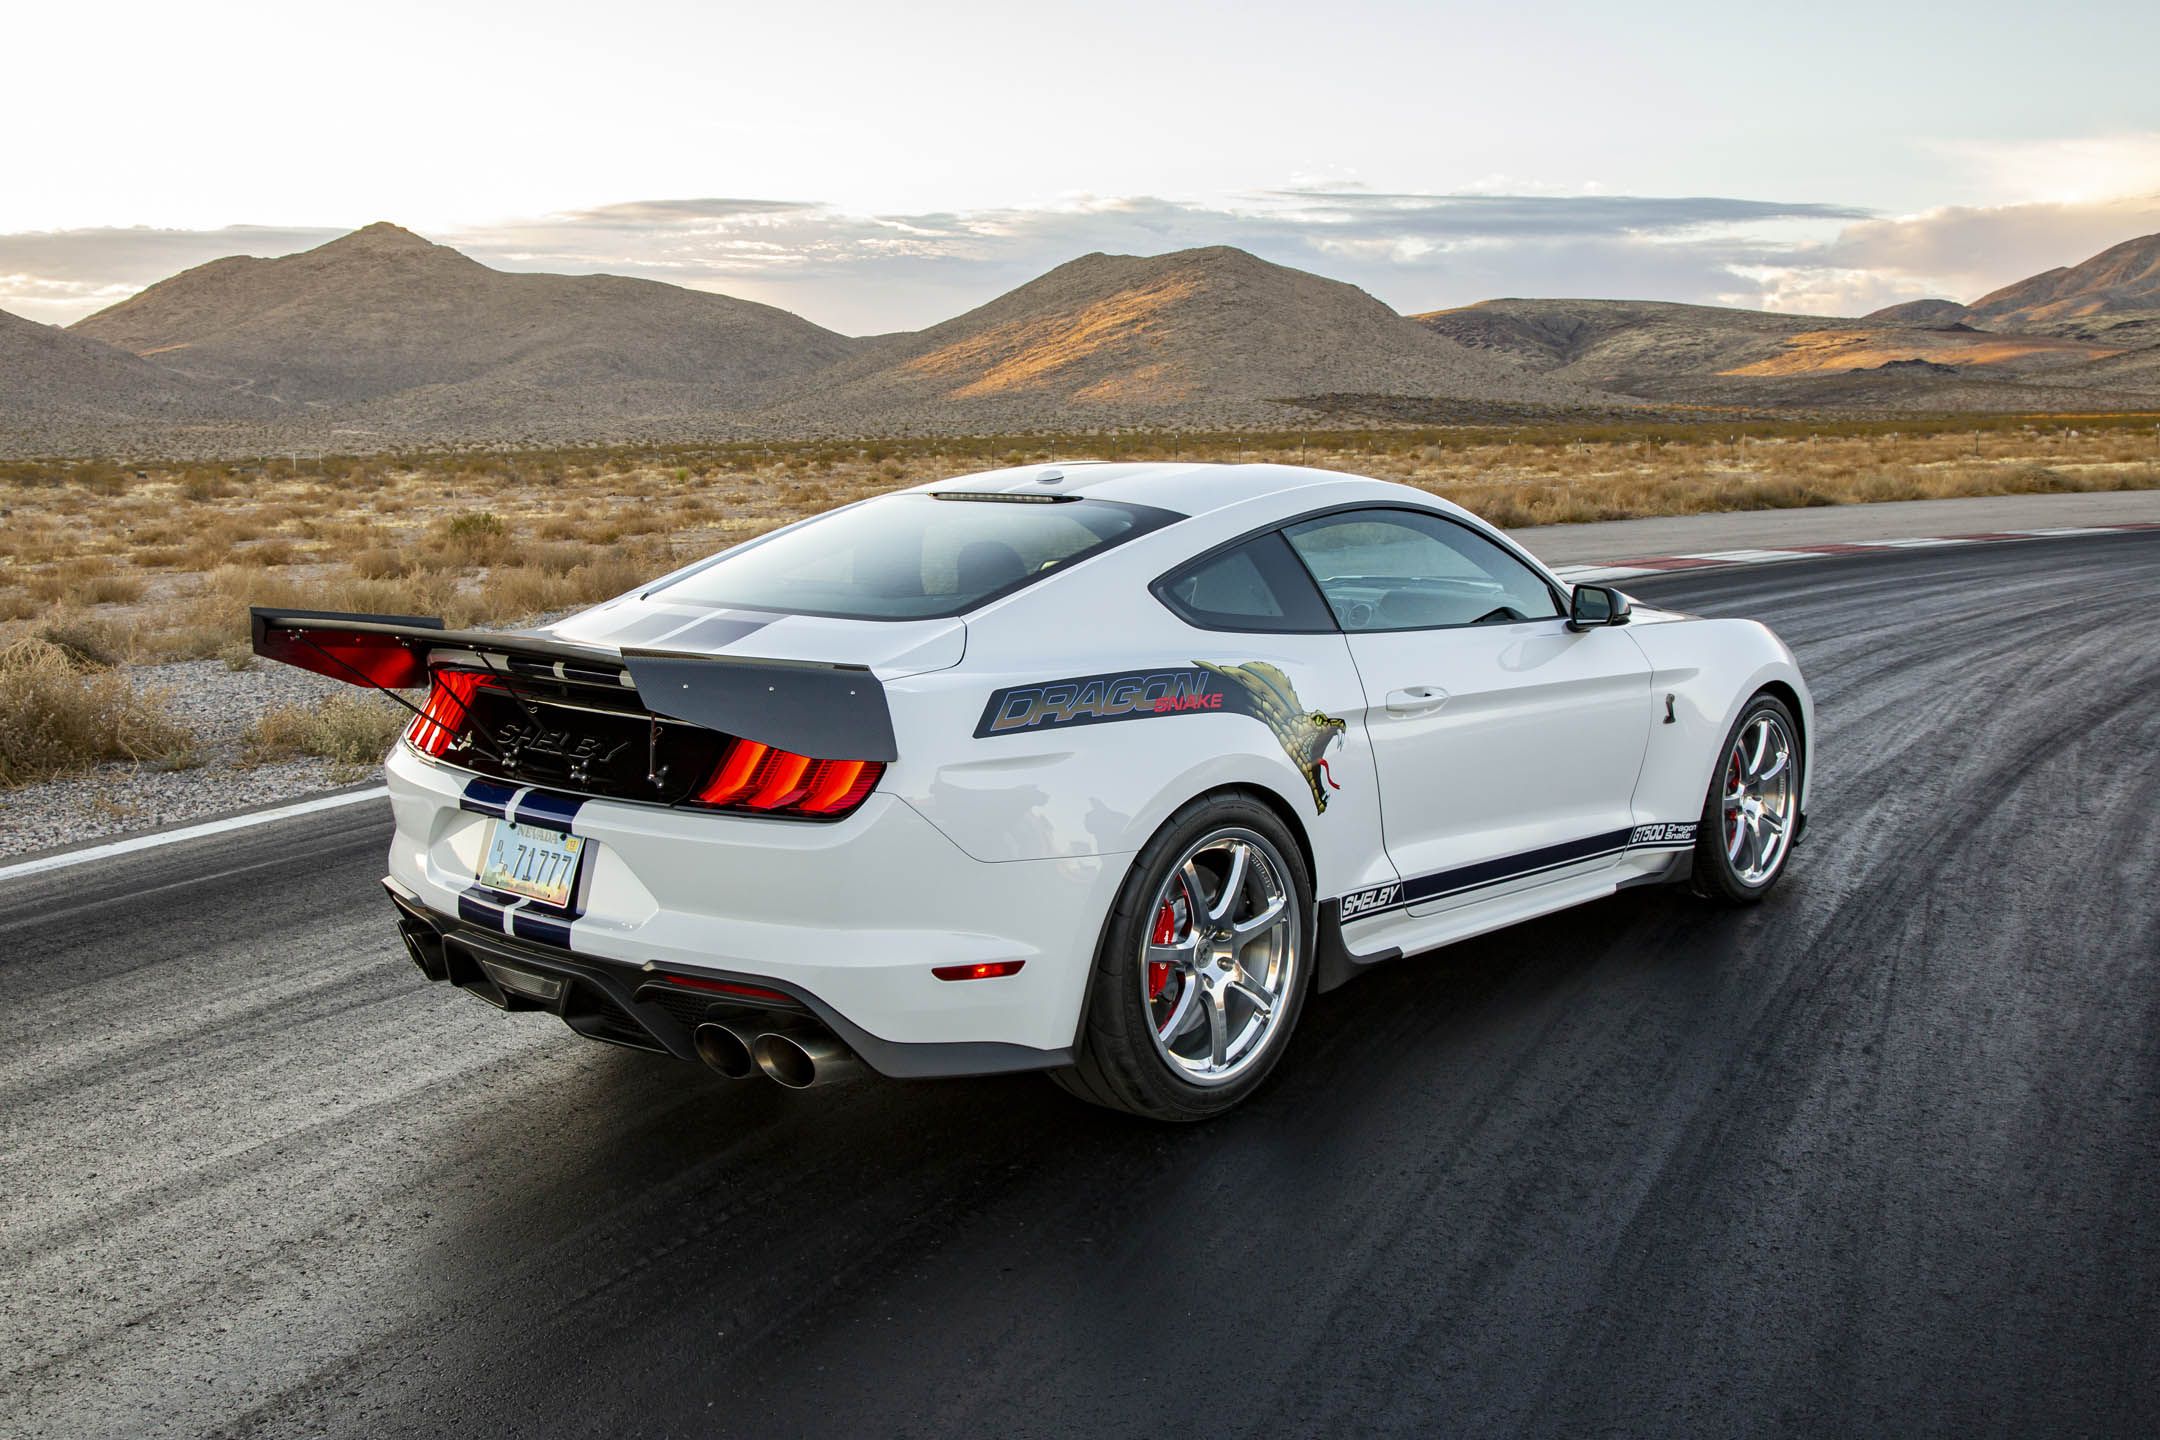 Ford's Mustang Shelby GT500 is a street legal monster